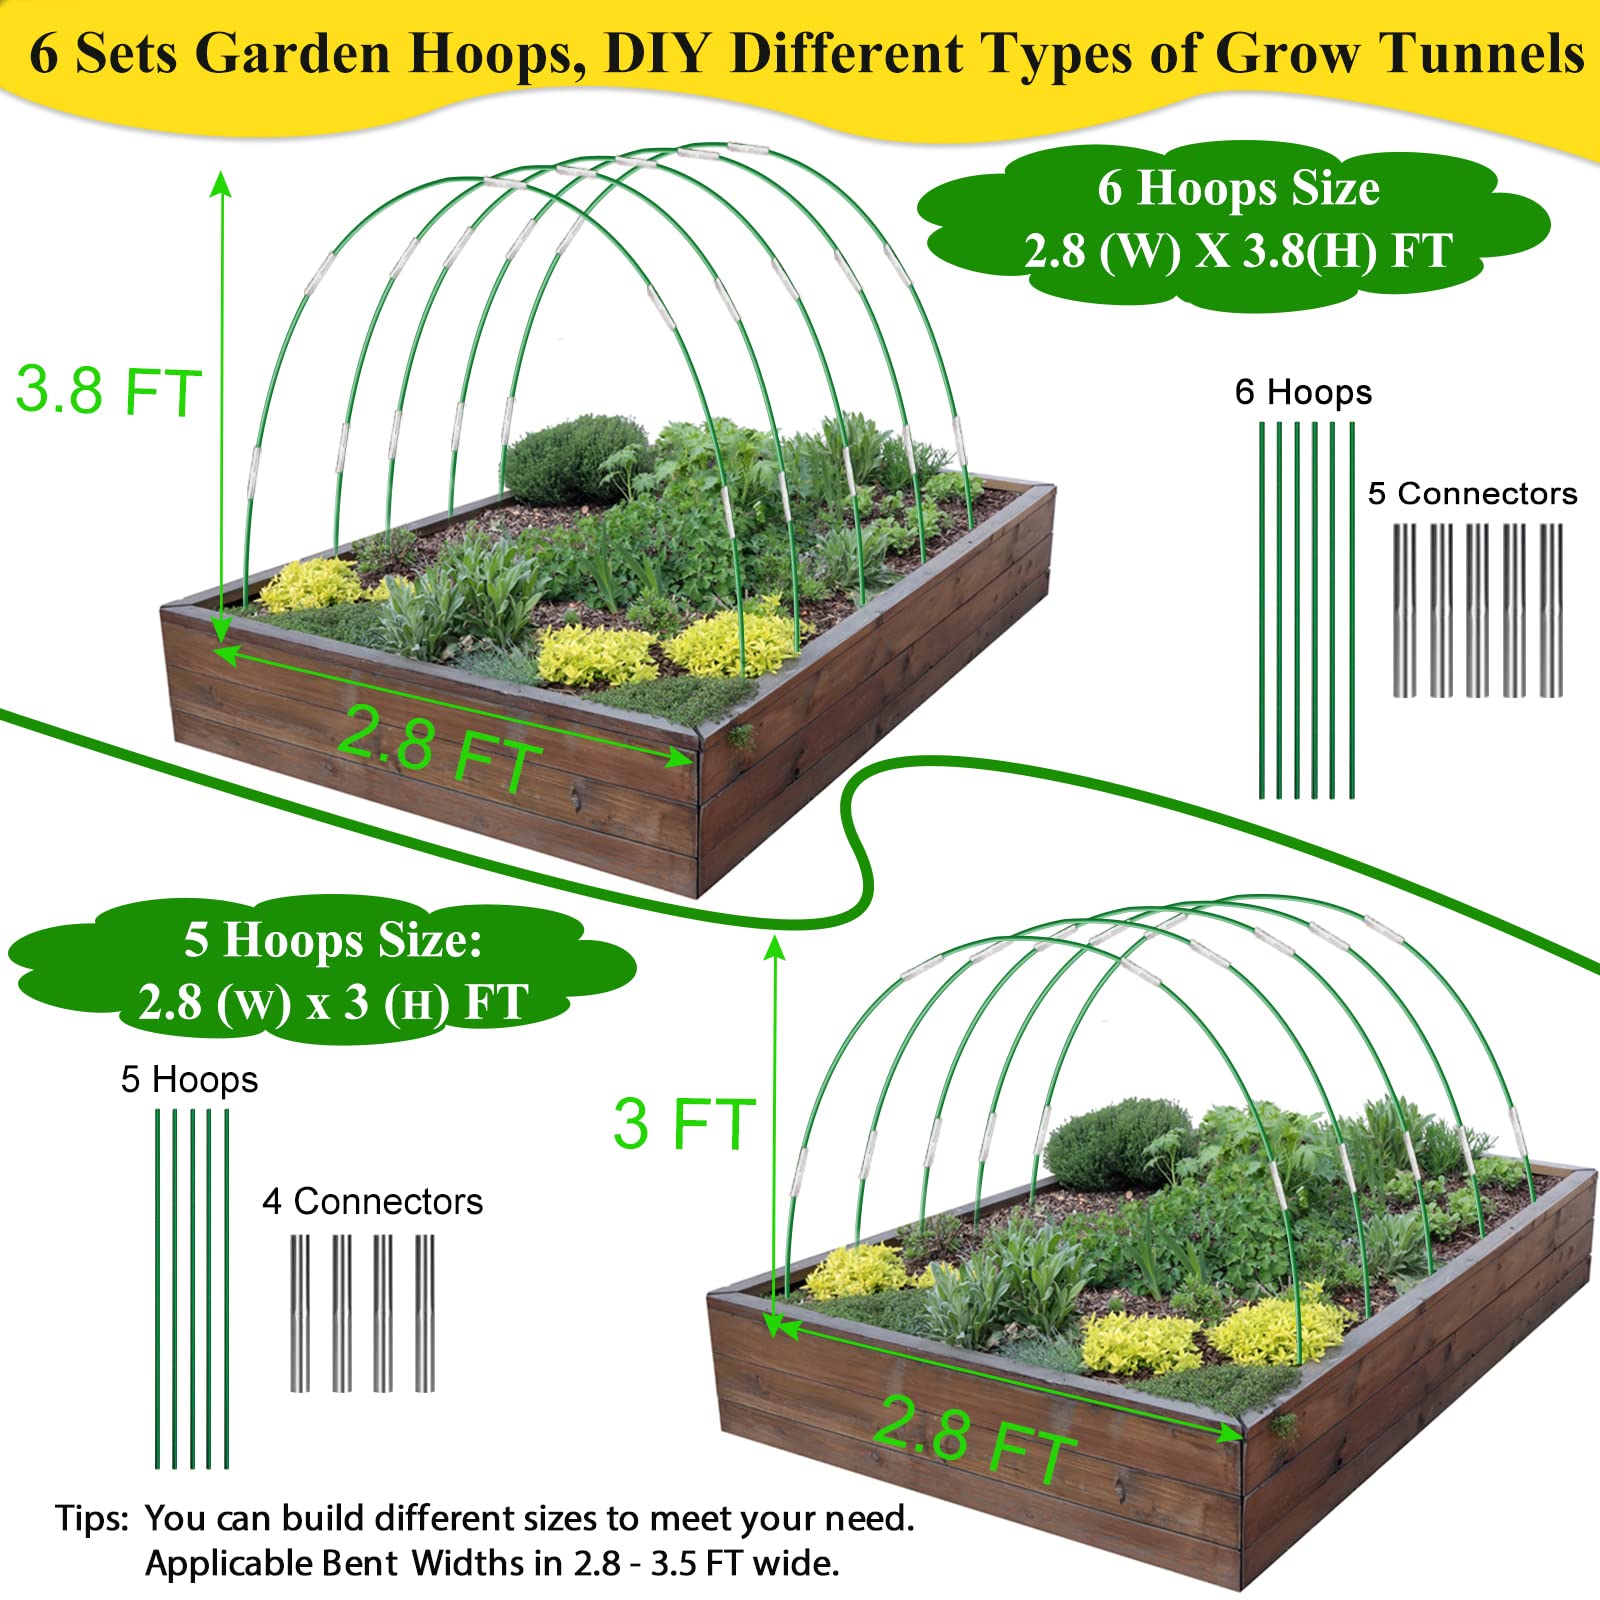 Greenhouse Hoops Grow Tunnel 6 Sets of 8FT Long Garden Hoops, Rust-Free Fiberglass Garden Hoops Frame for Garden Netting Raised Bed Plant Shade Cloth Row Cover, DIY Plant Support Garden Stakes- 36pcs